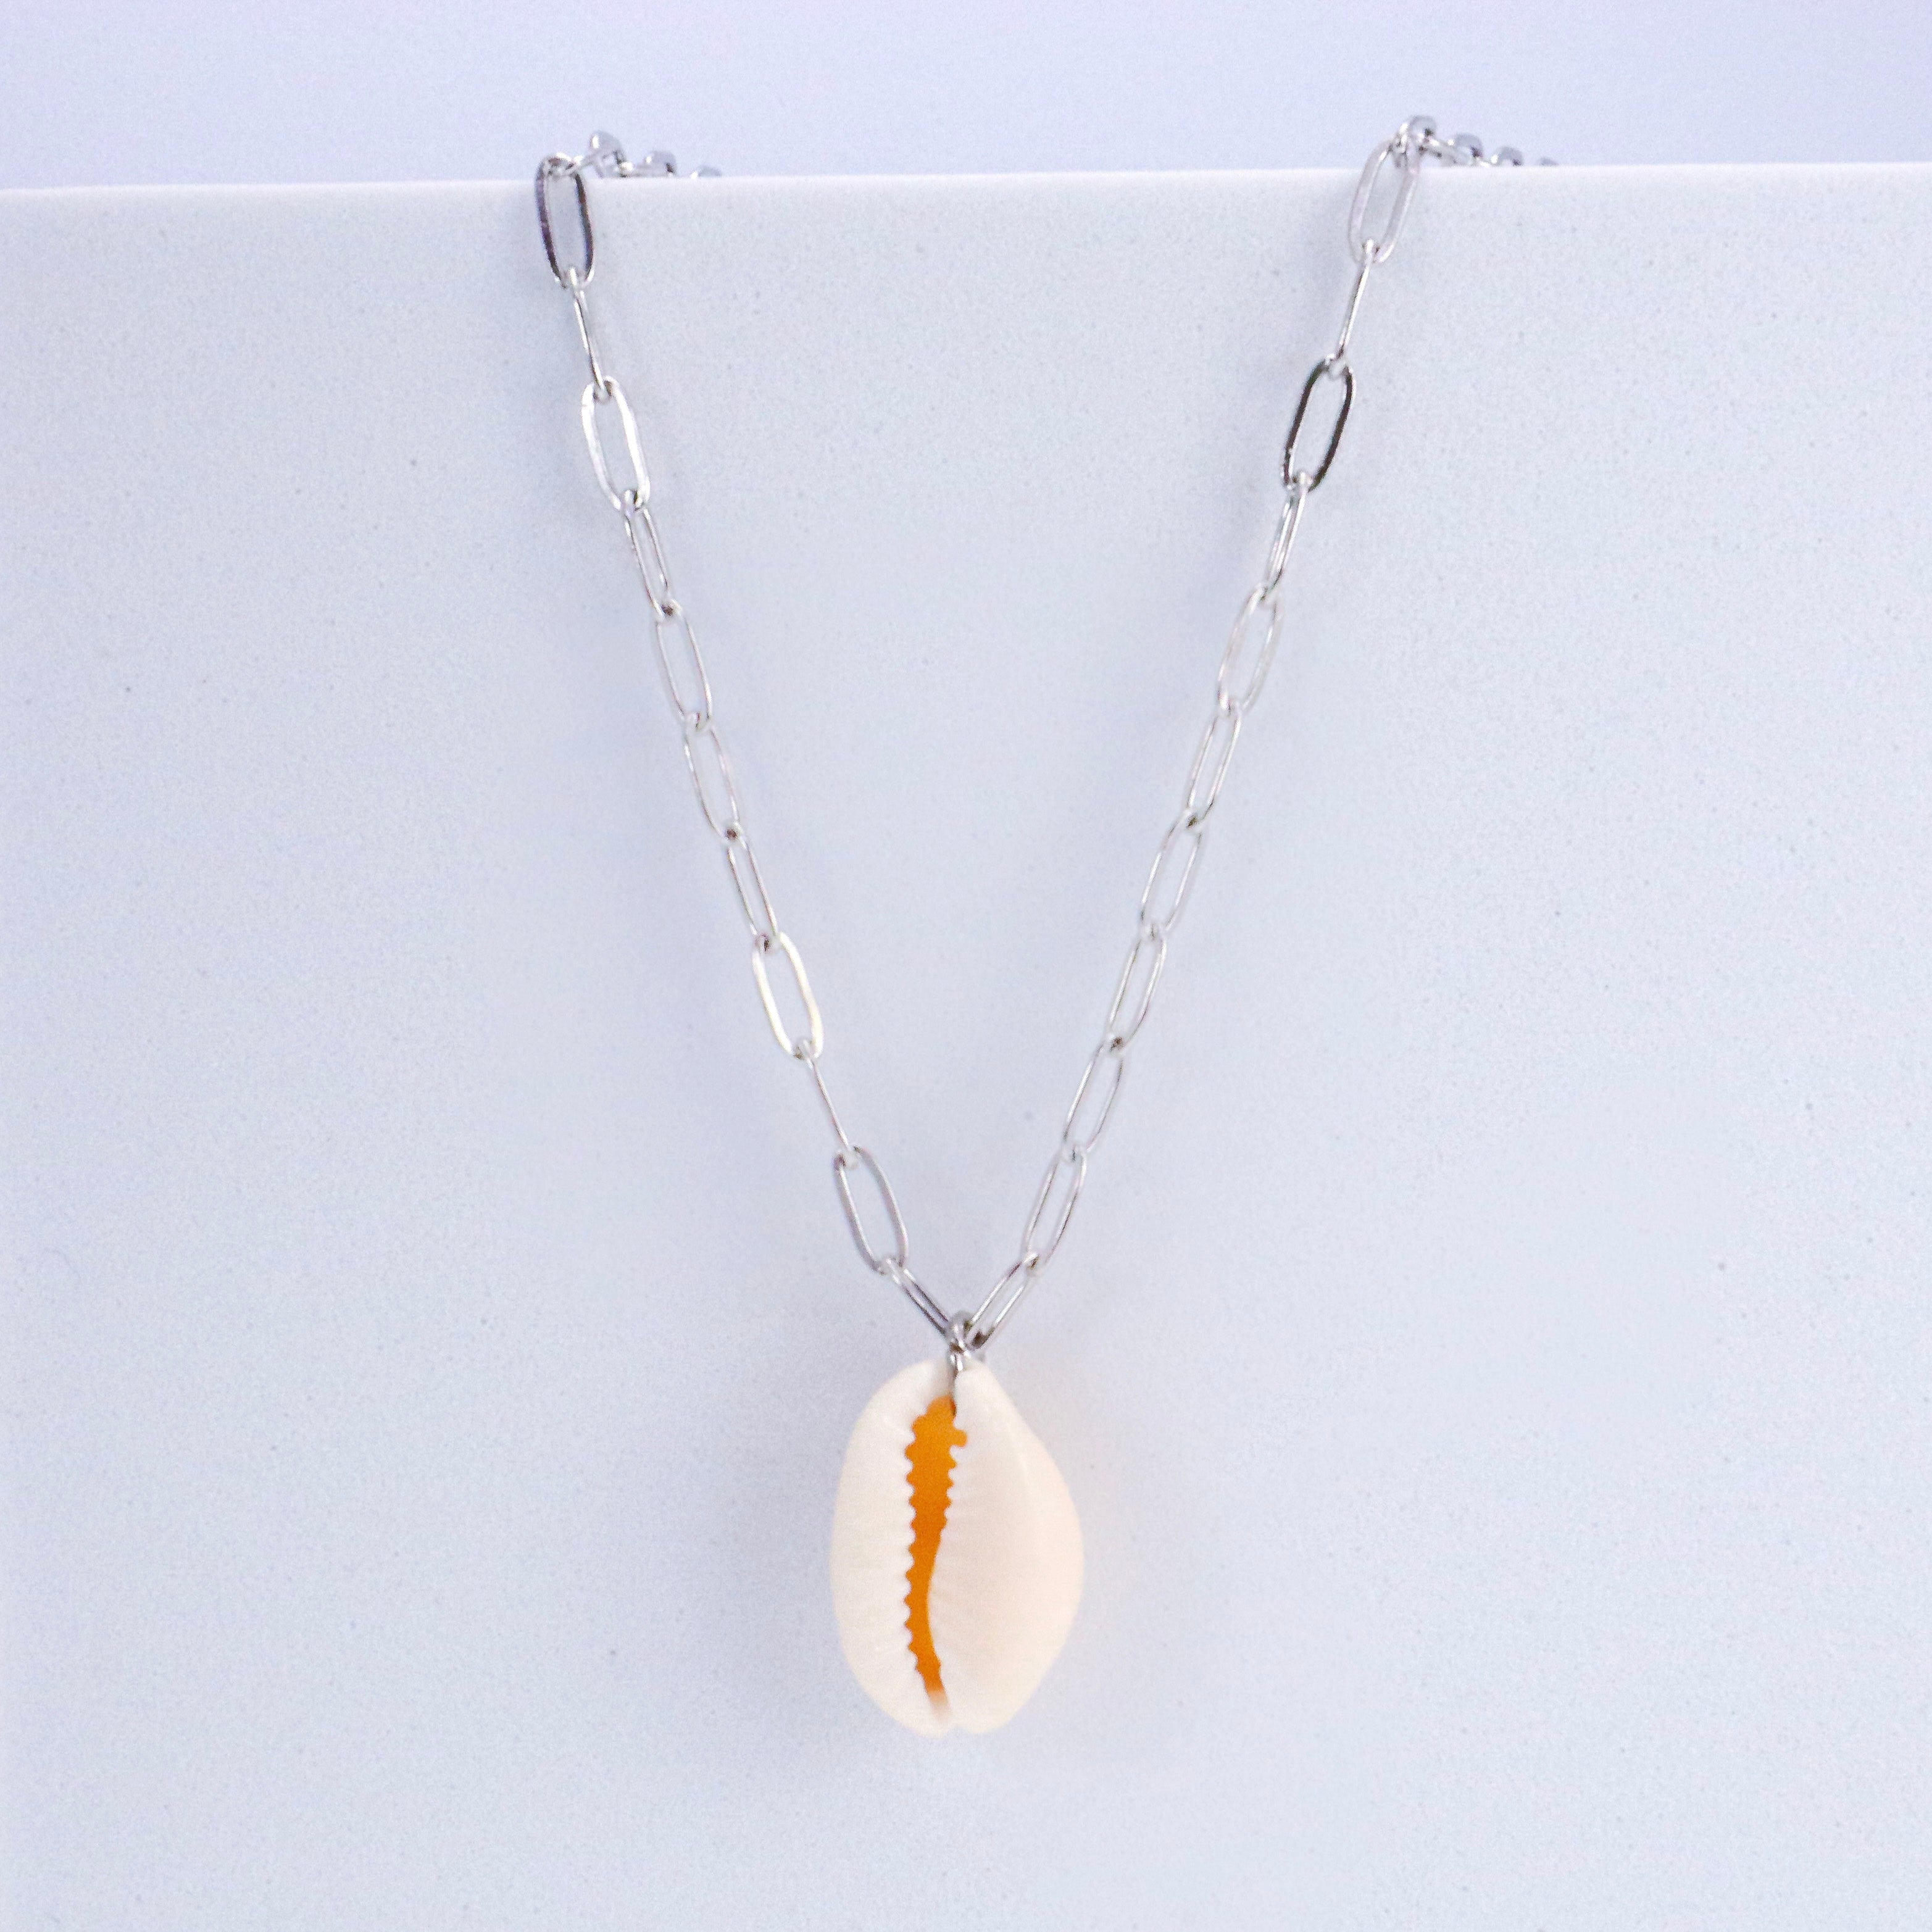 Cowrie Shell & Stainless Steel Staple Chain Necklace